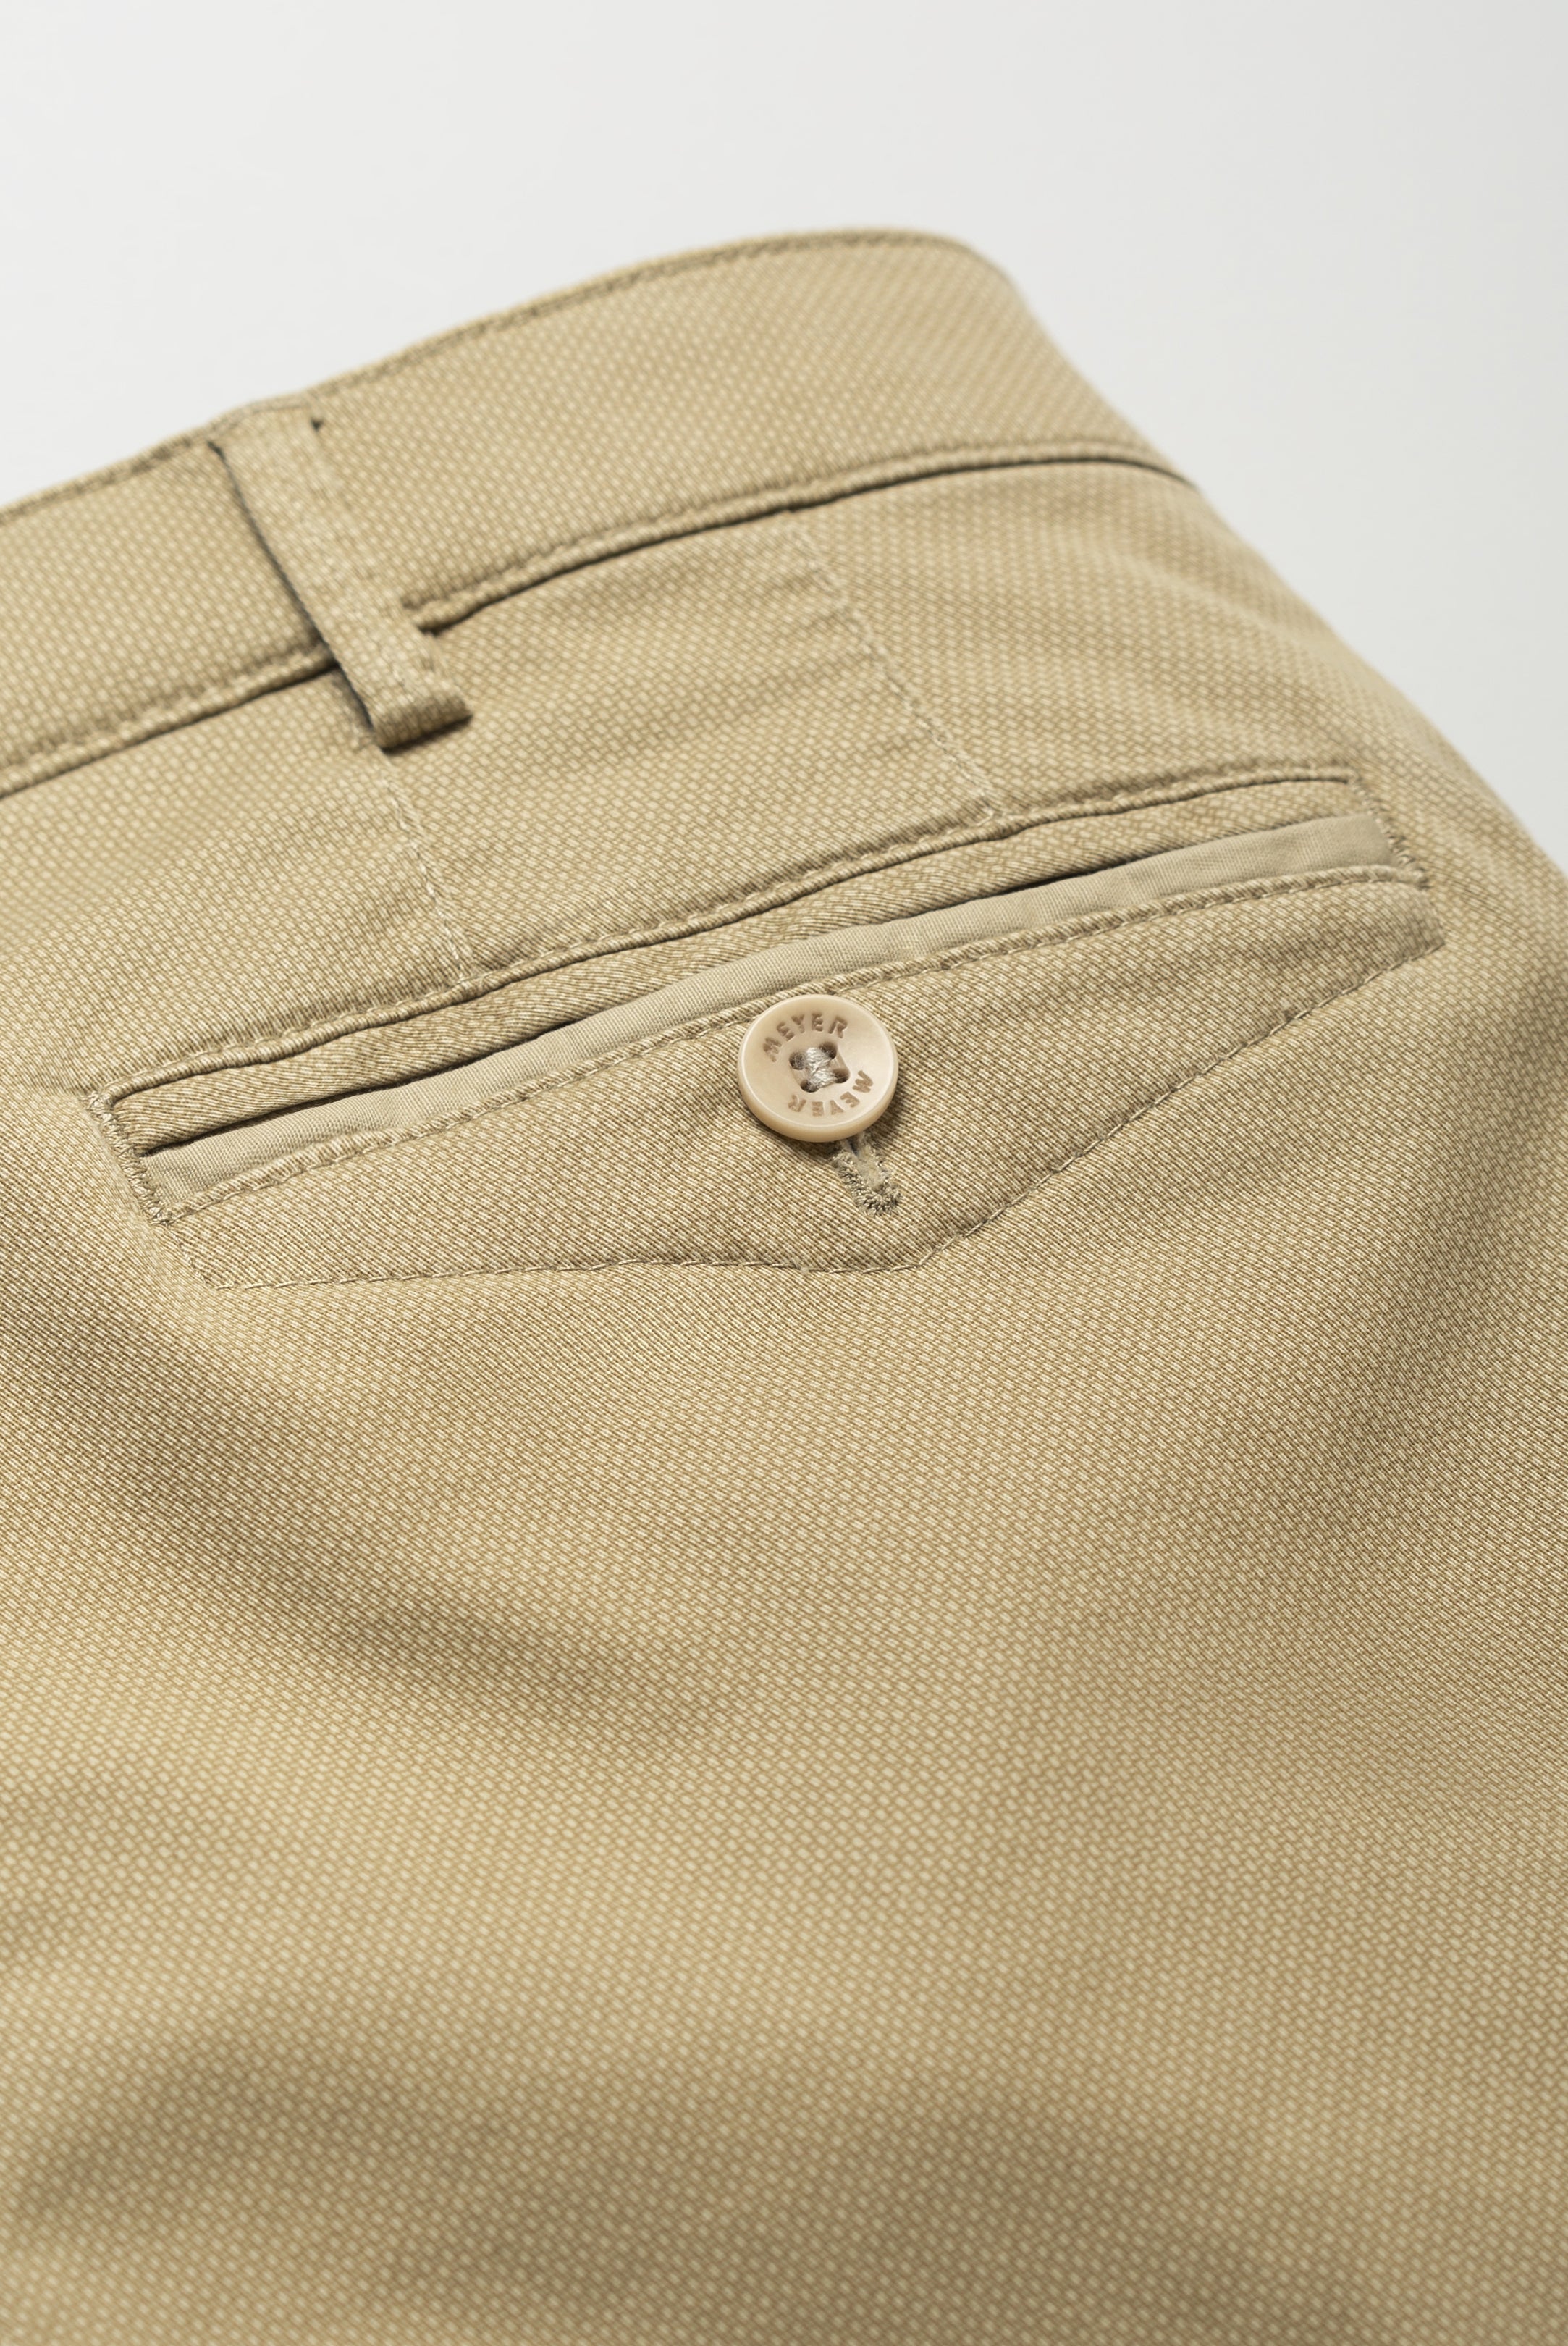 30% OFF - MEYER Chicago Trousers - 5056 Micro Print Cotton Chino - Sand - Sizes: 32 REG & 40 SHORT